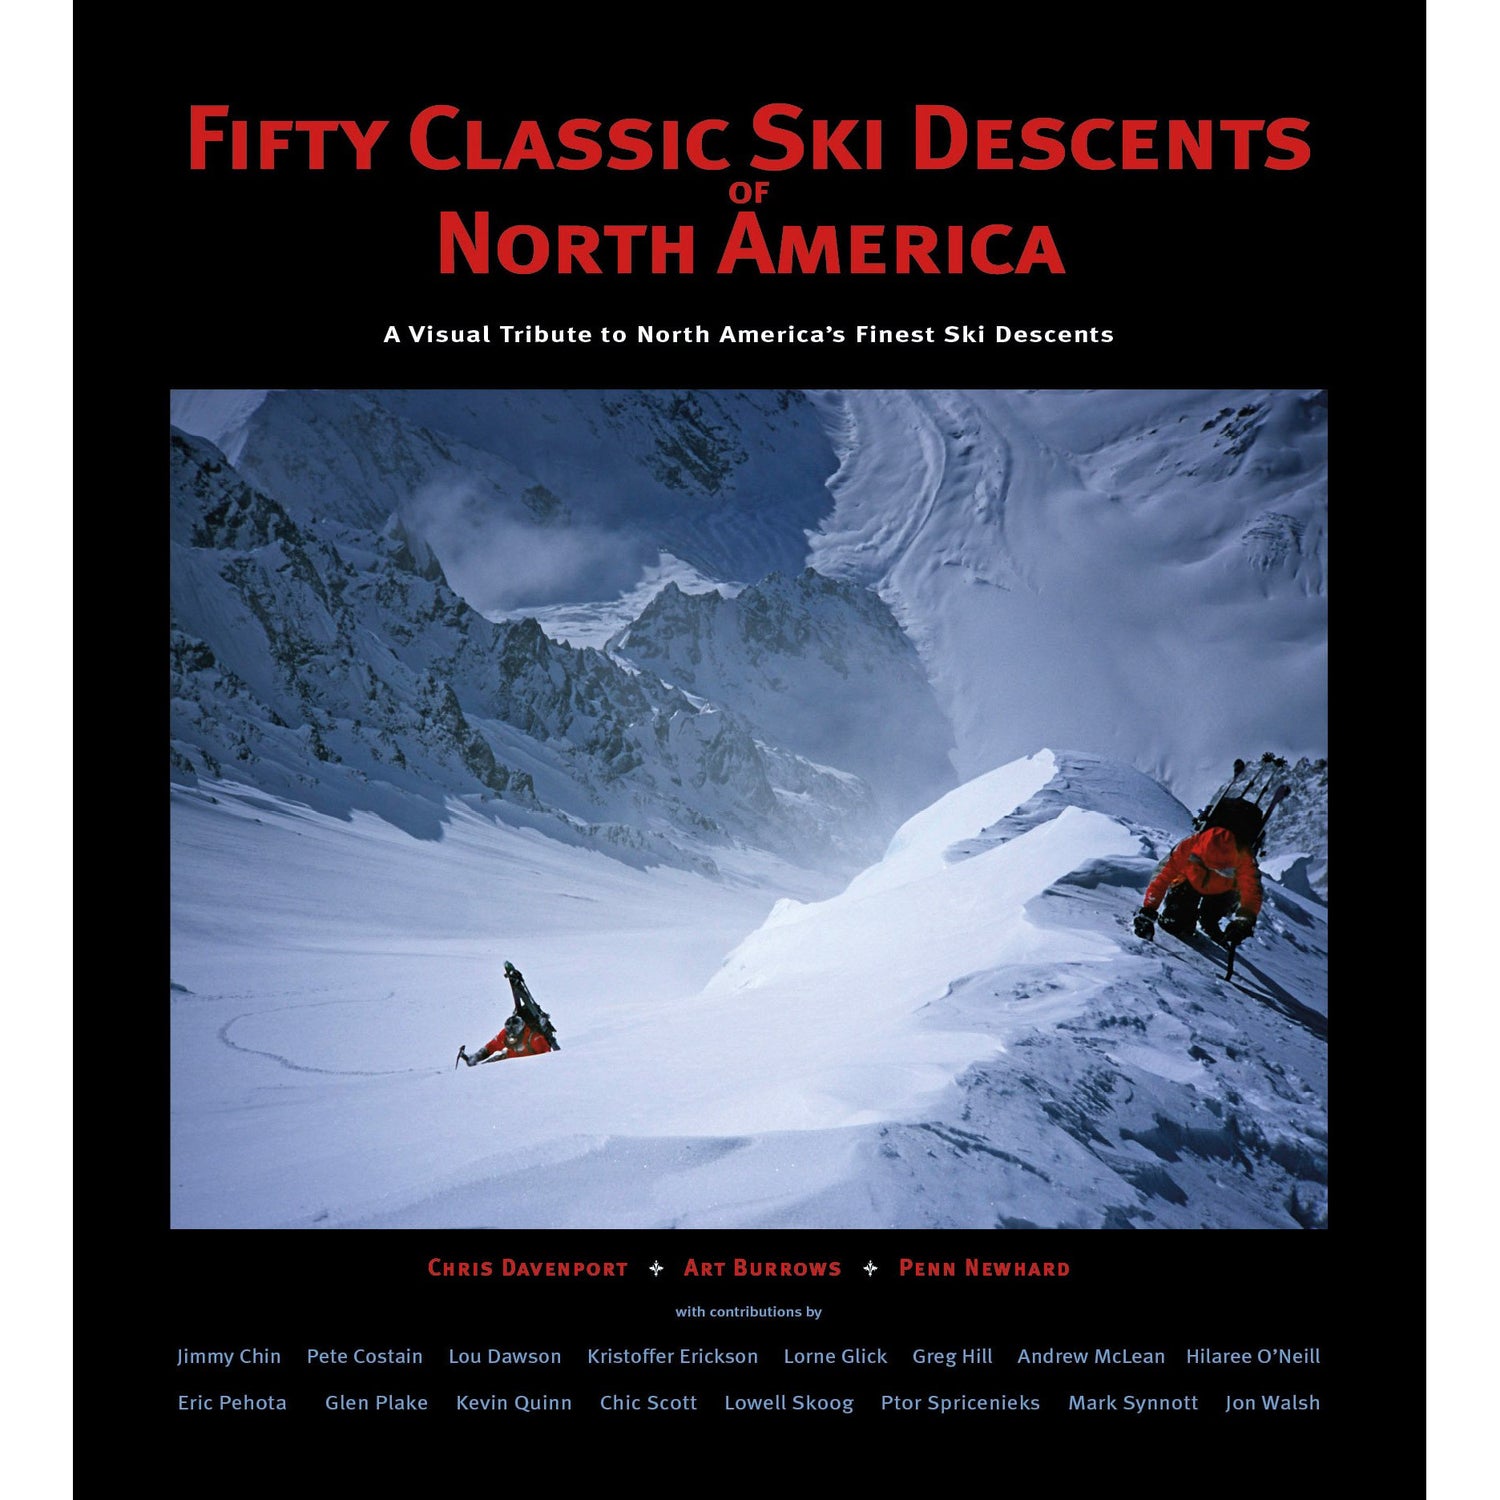 Fifty Classic Ski Descents of North America | Backcountry Books